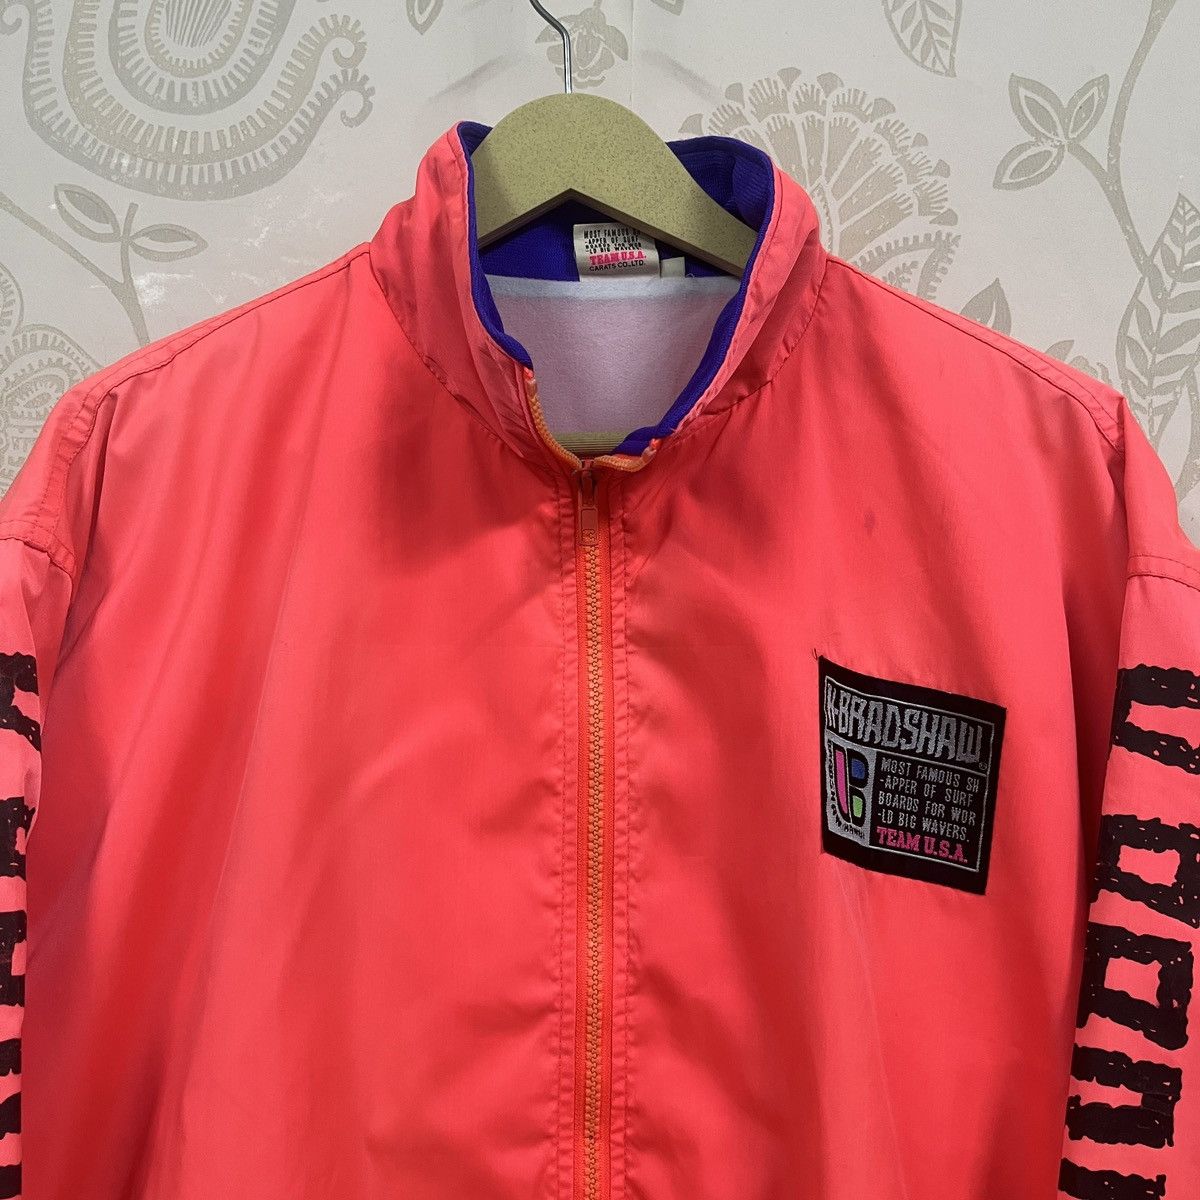 Vintage 80s Surf Style Jacket Fluorescent Red Hawaii USA - 19